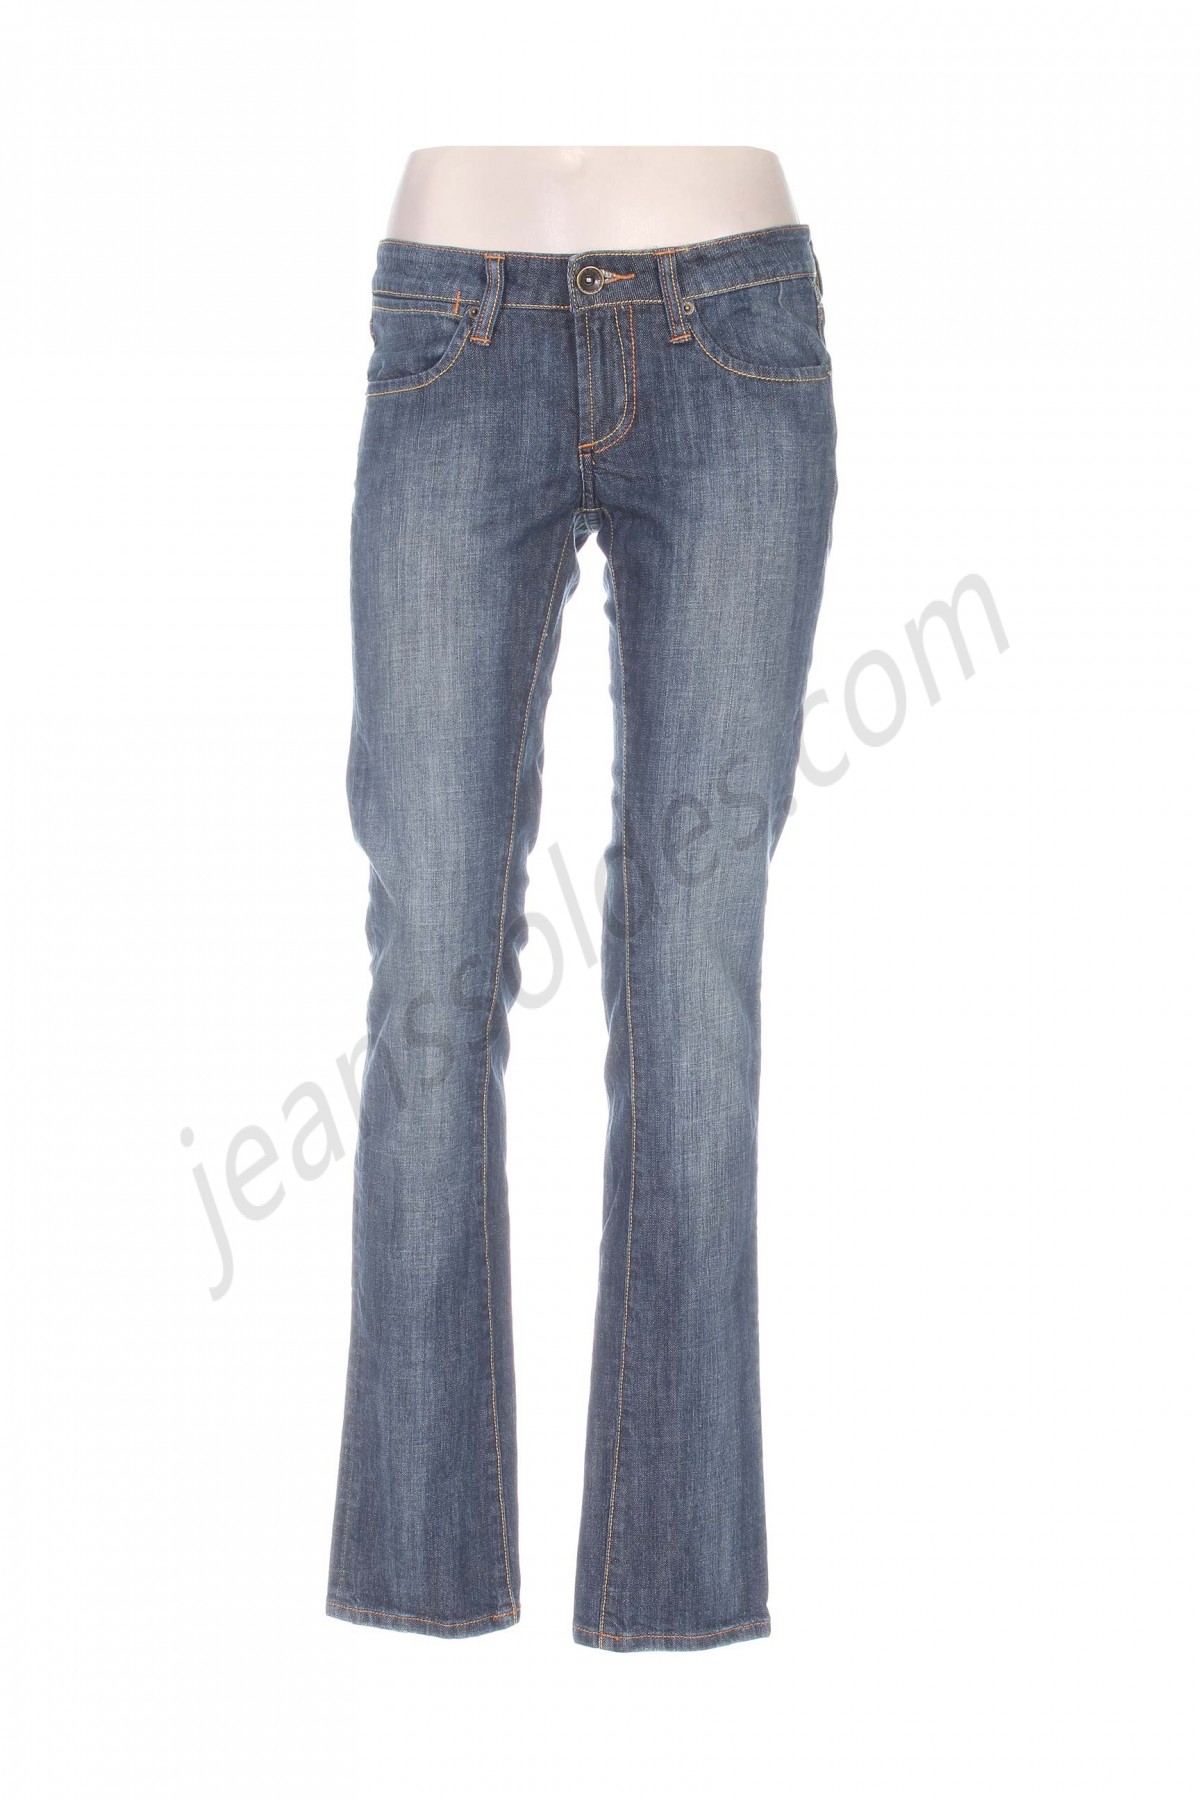 ed hardy-Jeans coupe slim prix d’amis - -0